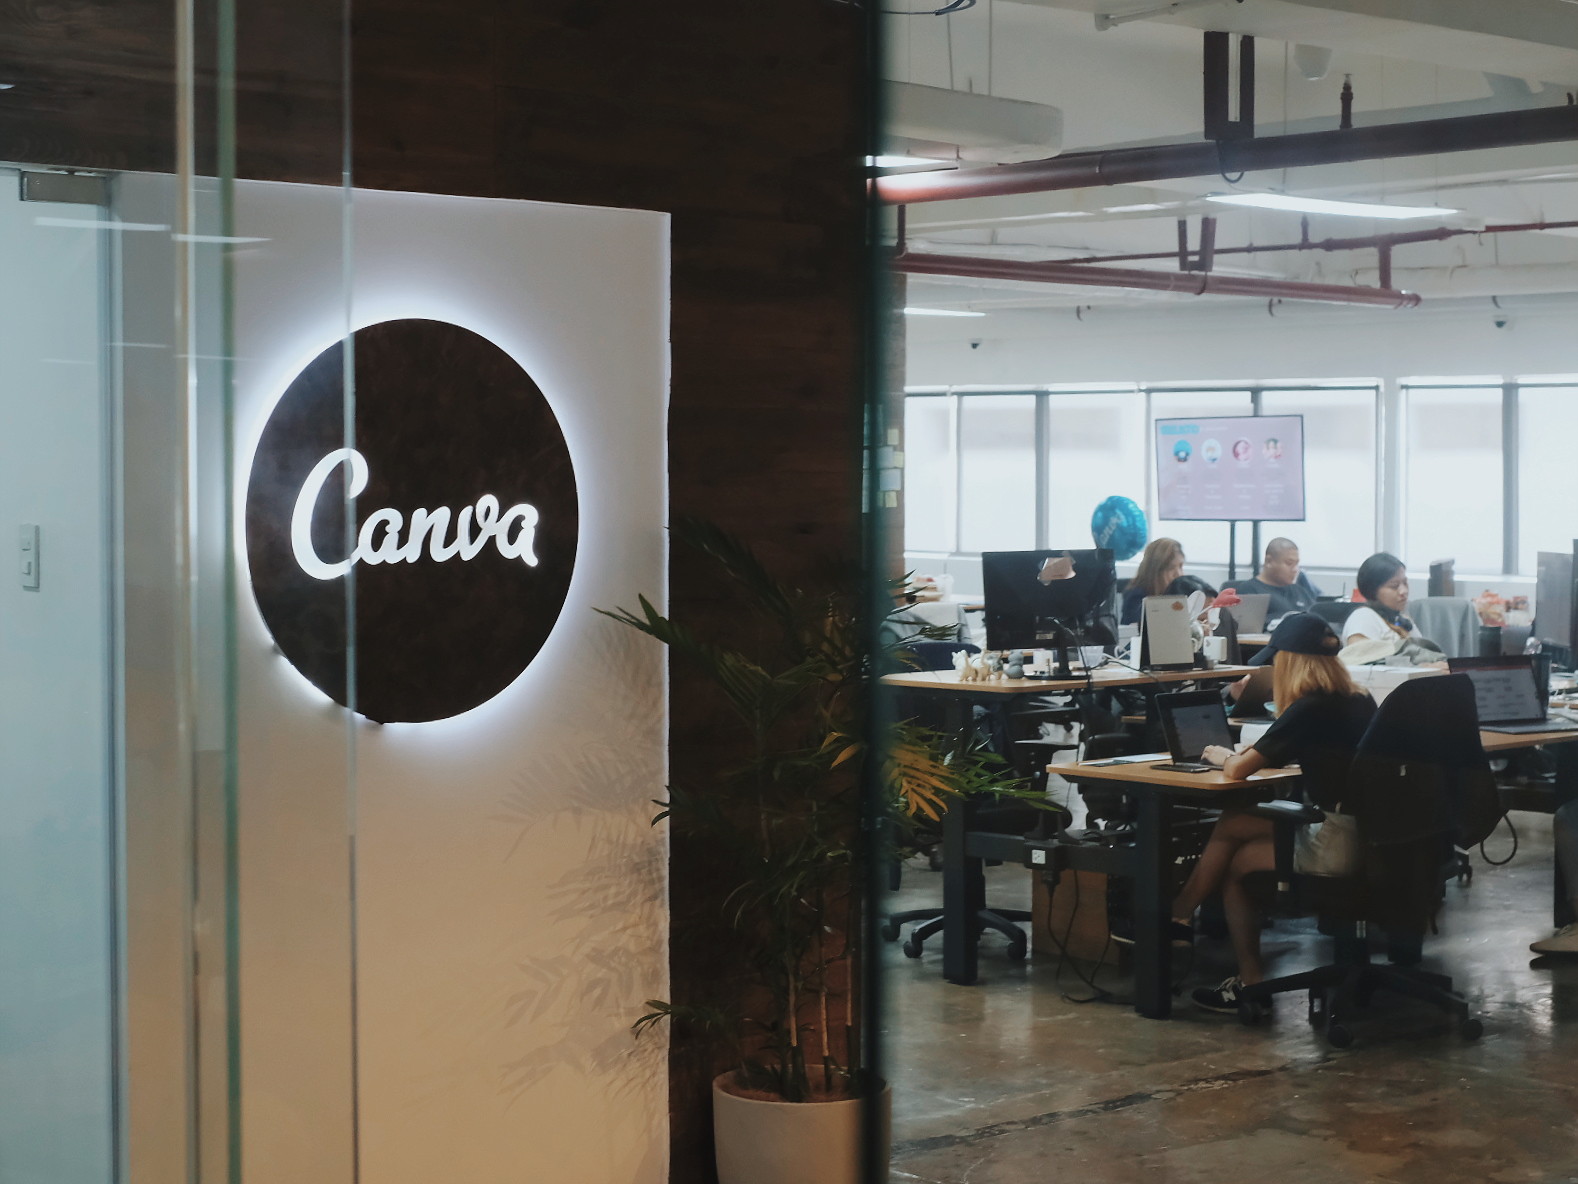  Inside the Cool Office of Canva Philippines